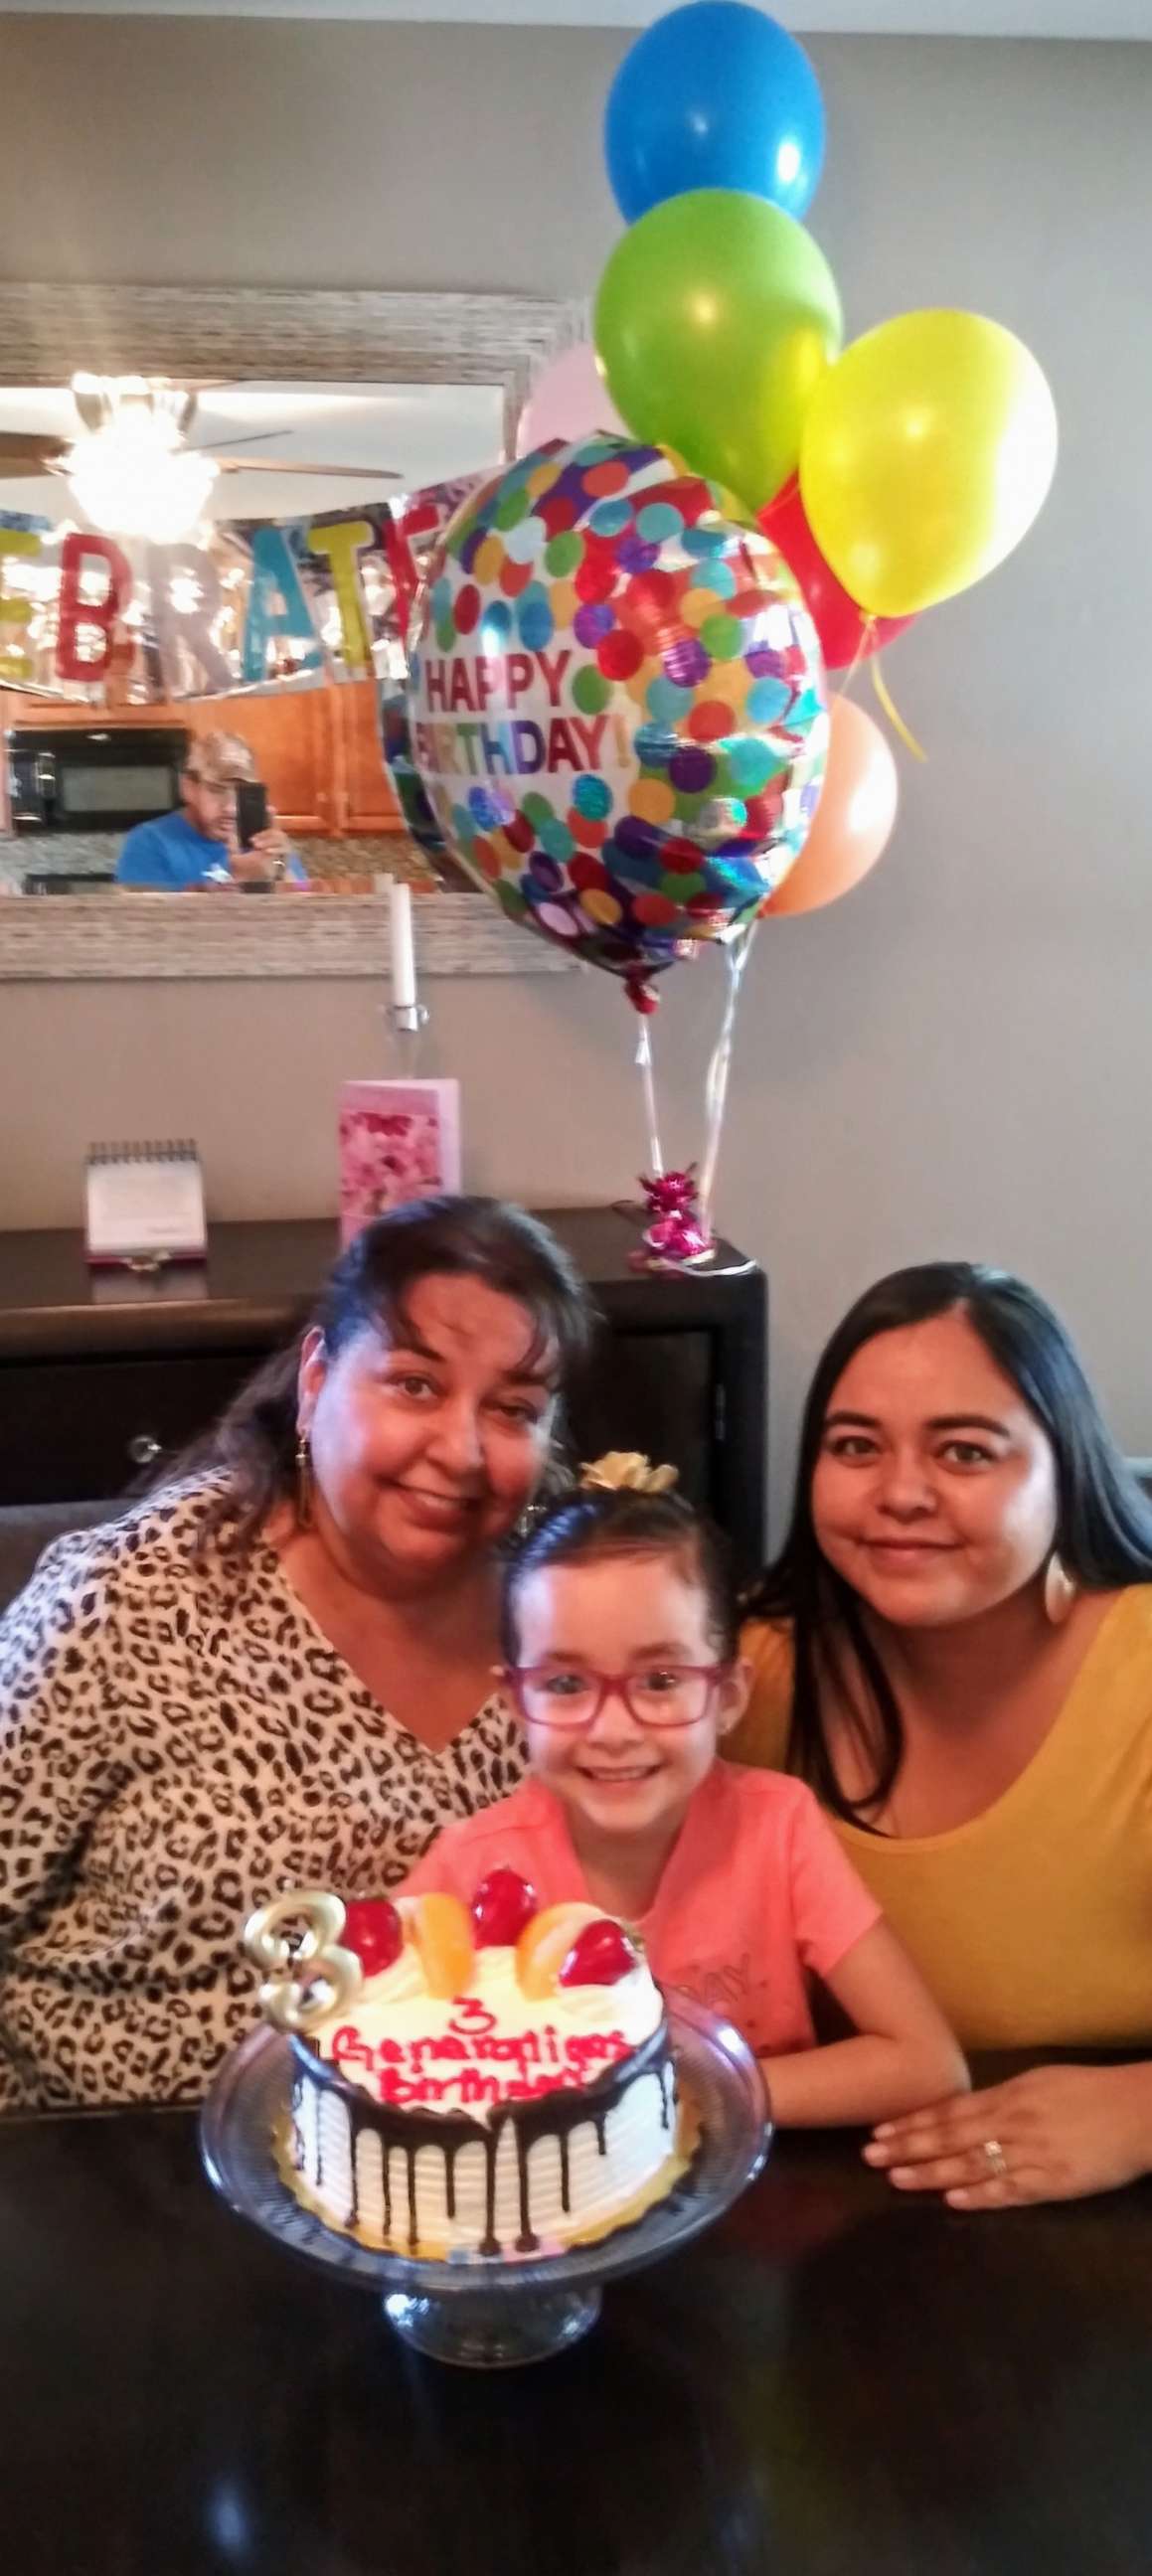 PHOTO: Lourdes Pizarro (aka Nana) was born Oct. 2, 1959. On Oct. 2, 1989, Pizarro gave birth to Jessica Chavez. On Oct. 2, 2013, Pizarro's other daughter, Sarah, welcomed Sabella Contreras. Sabella turned 6 this year. 